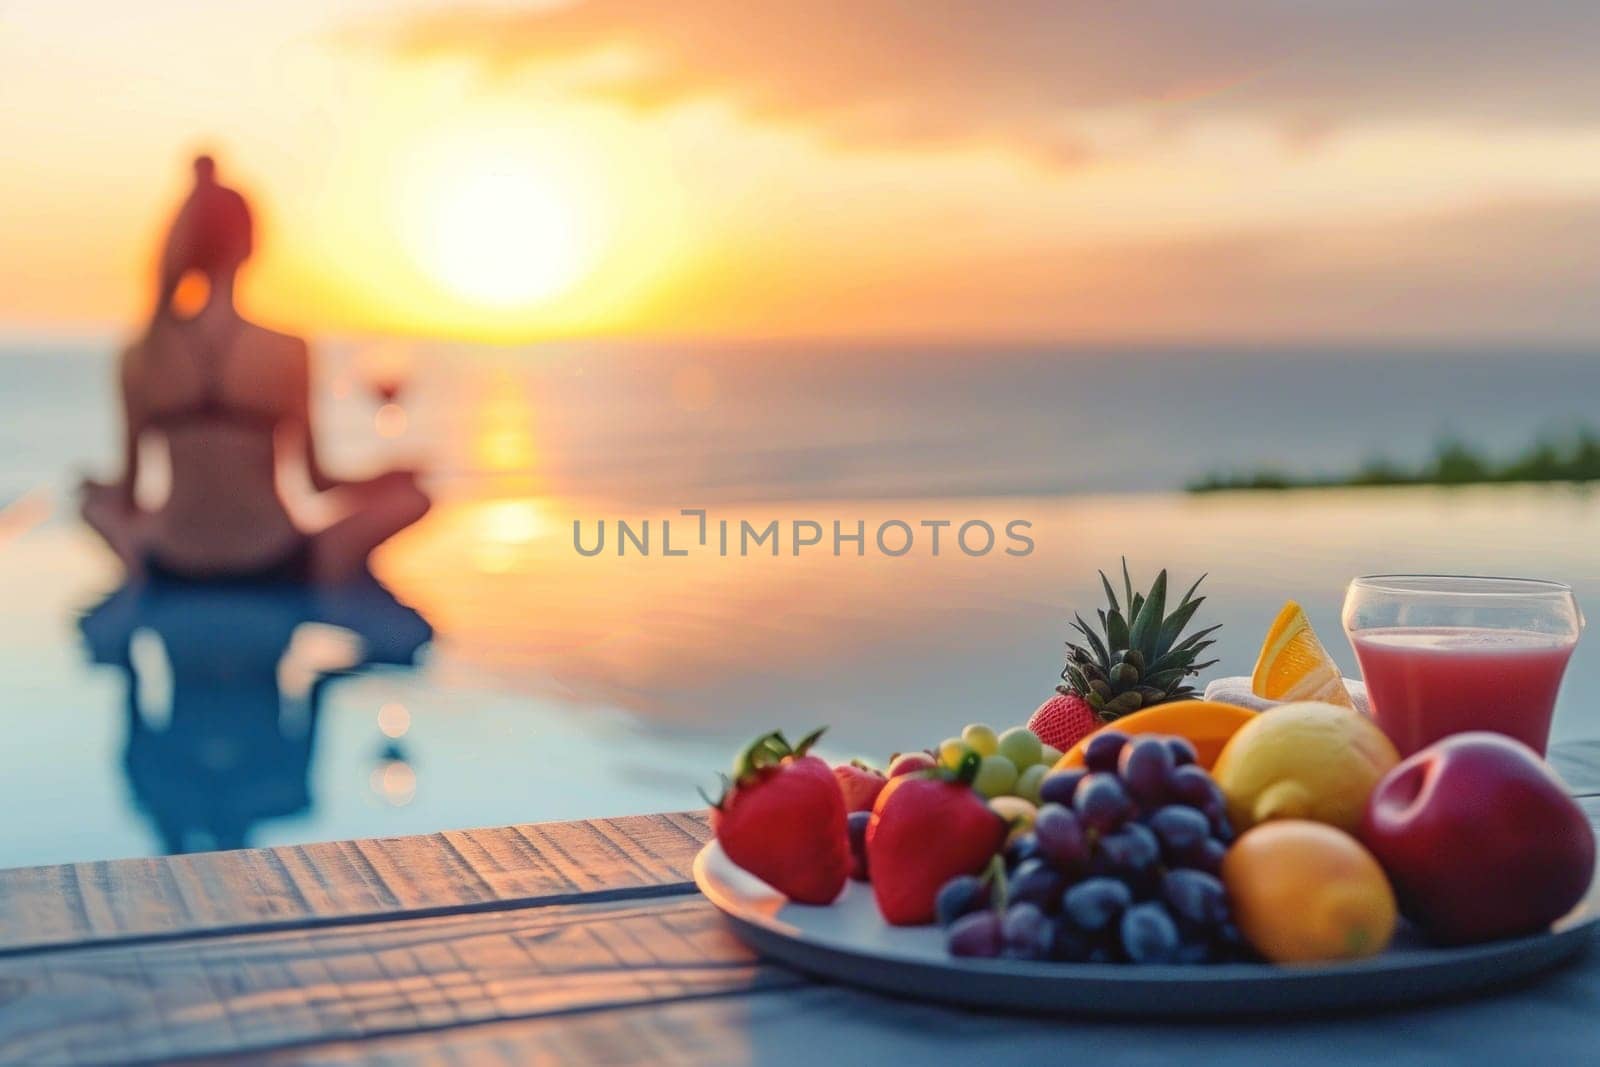 Lifestyle Wellness concept, An image that focuses on healthy fruit and vegetable juices with a background women and sea.